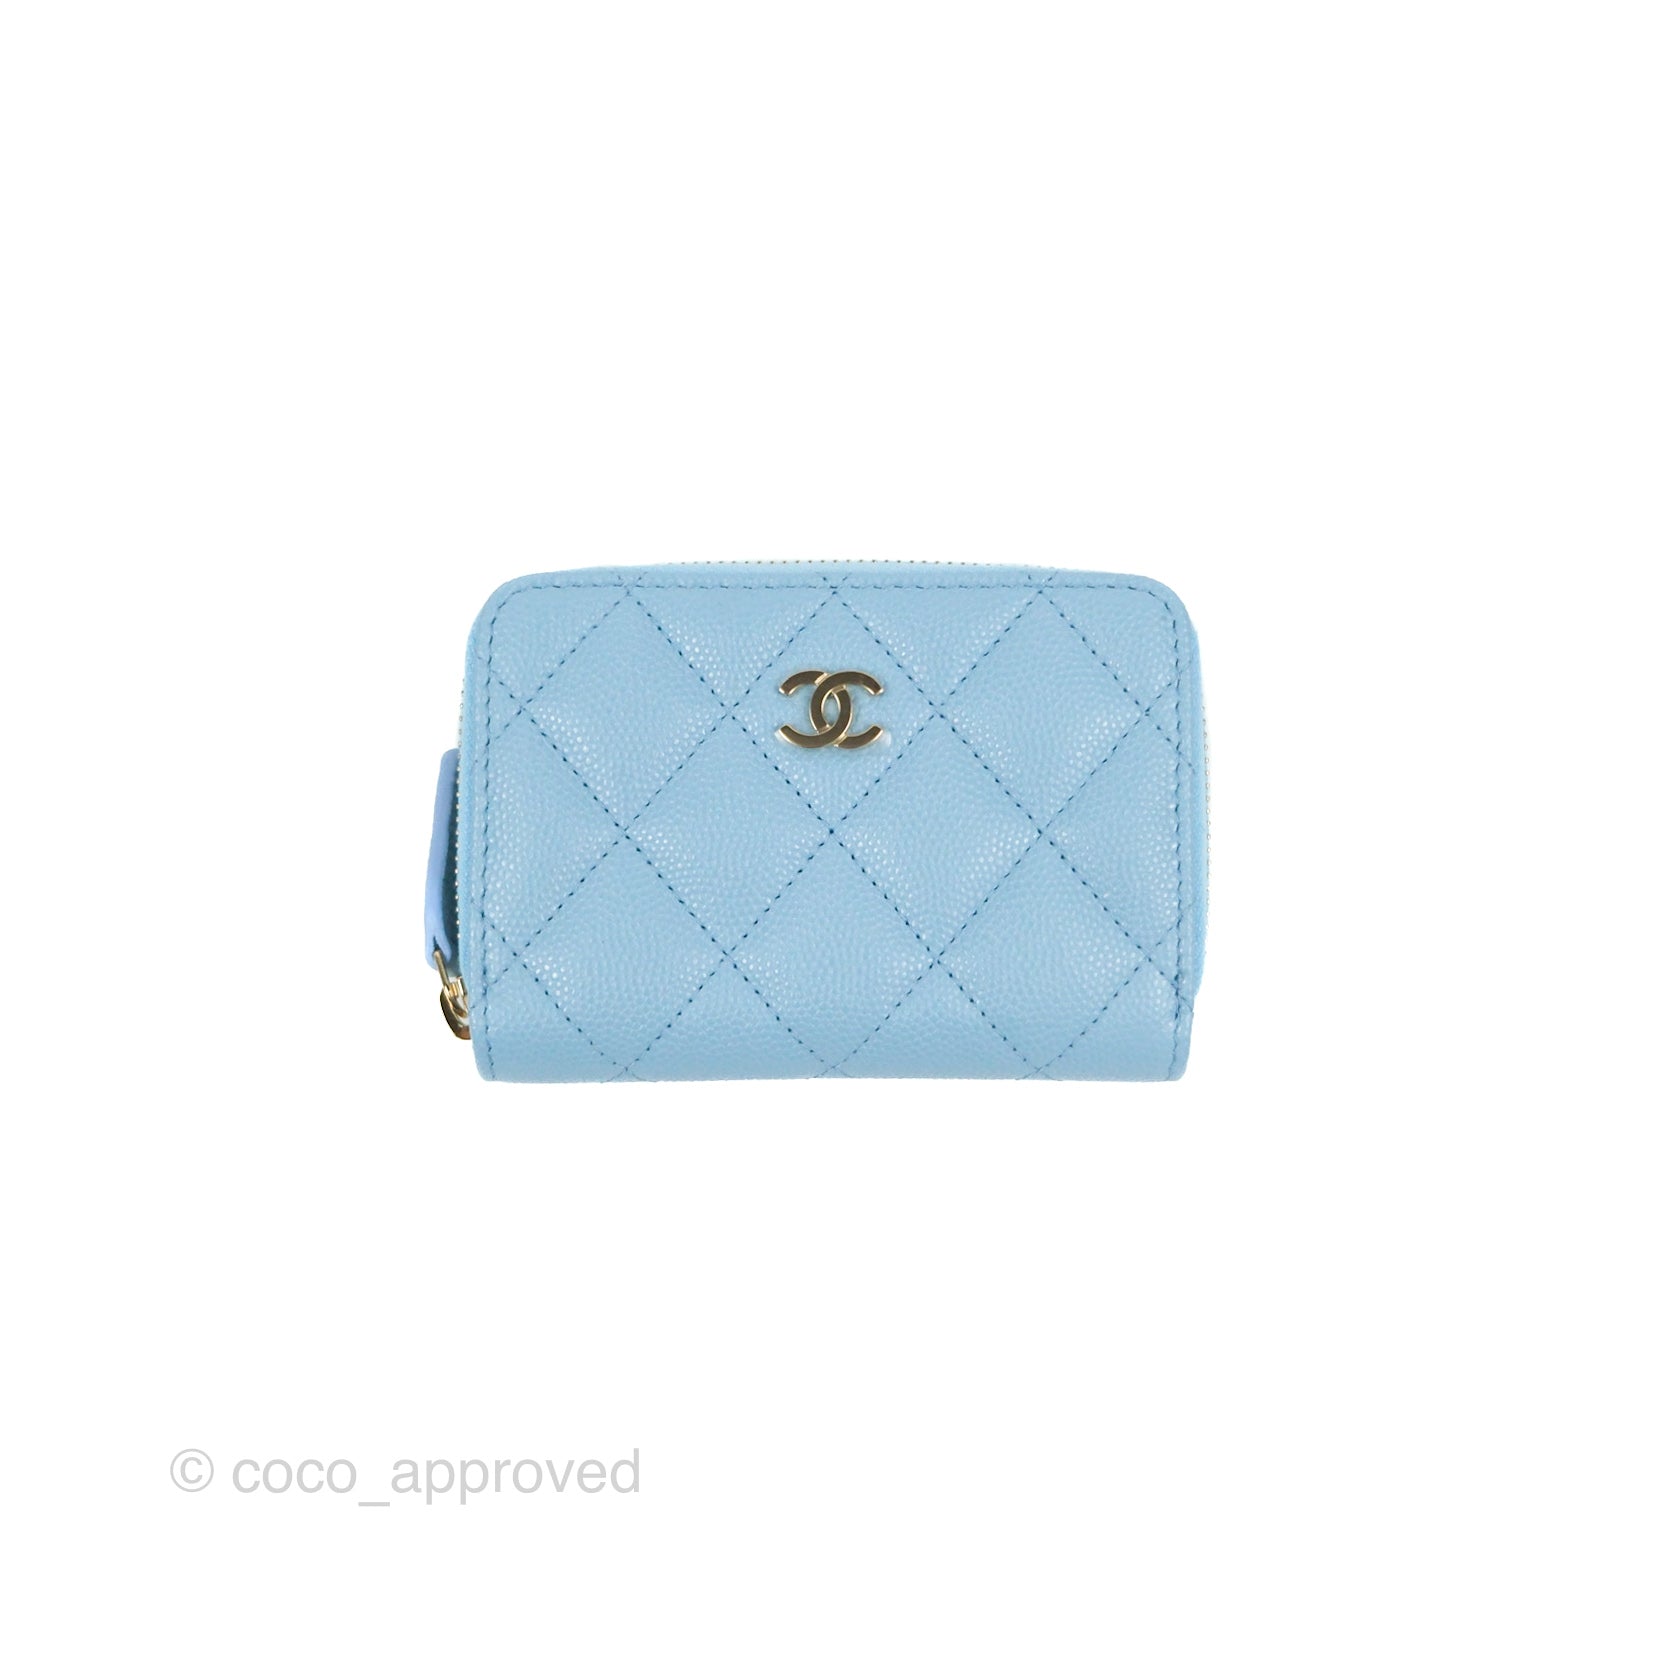 CHANEL Caviar Quilted Zip Coin Purse Light Blue 696161